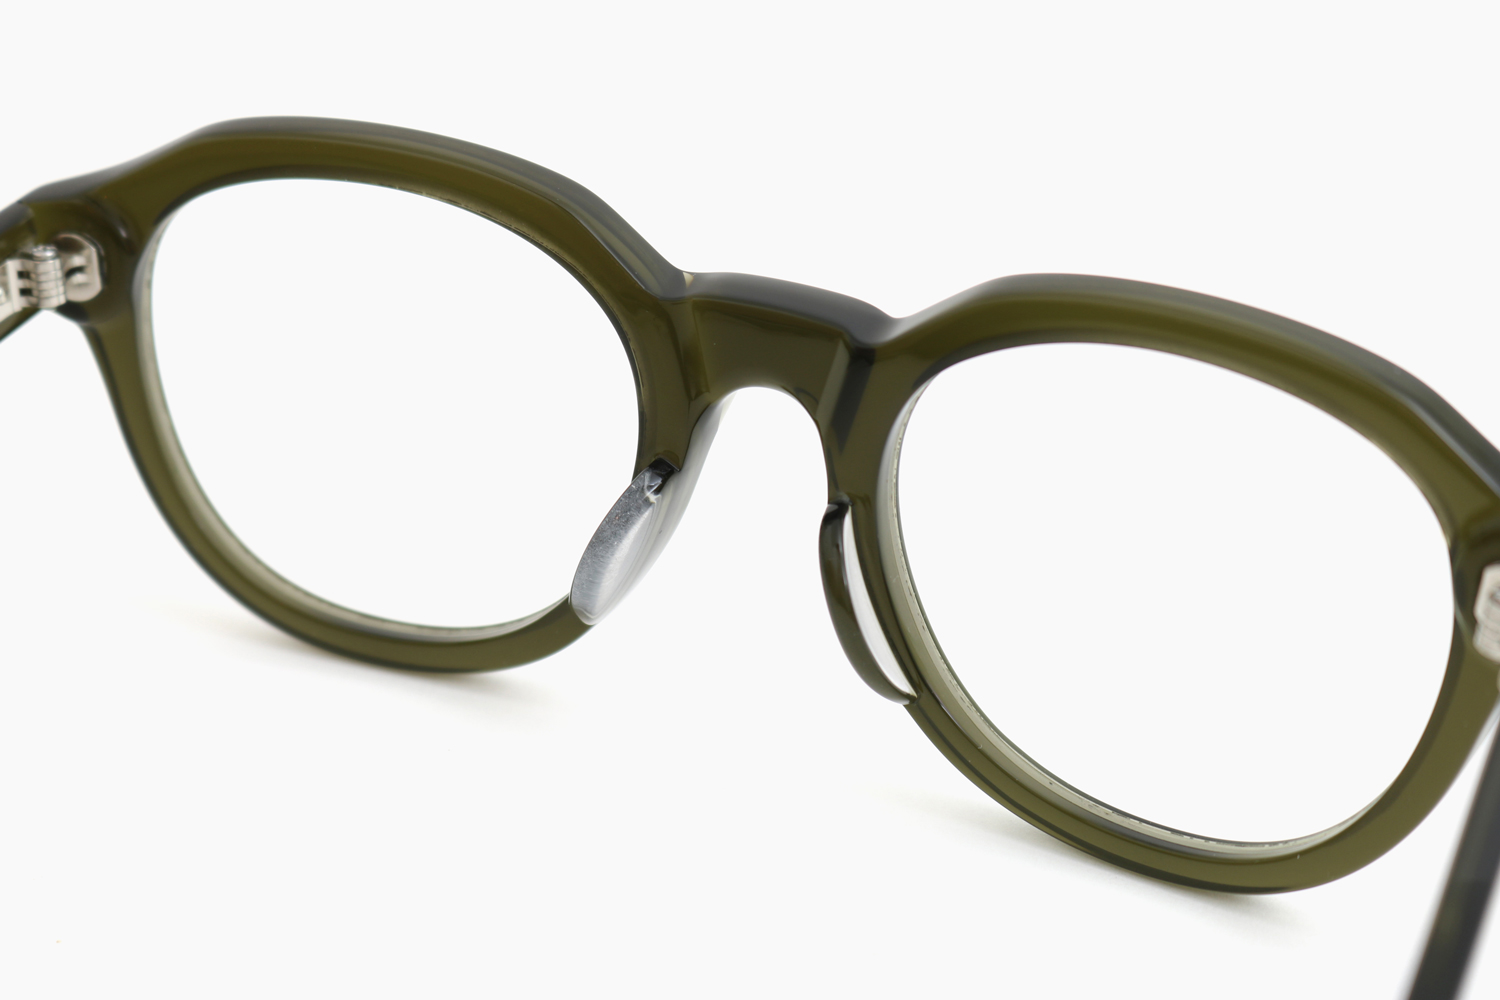 UNIVERSAL PRODUCTS. + Noritake x The PARKSIDE ROOM｜tpr-006 - KHAKI｜The PARKSIDE ROOM